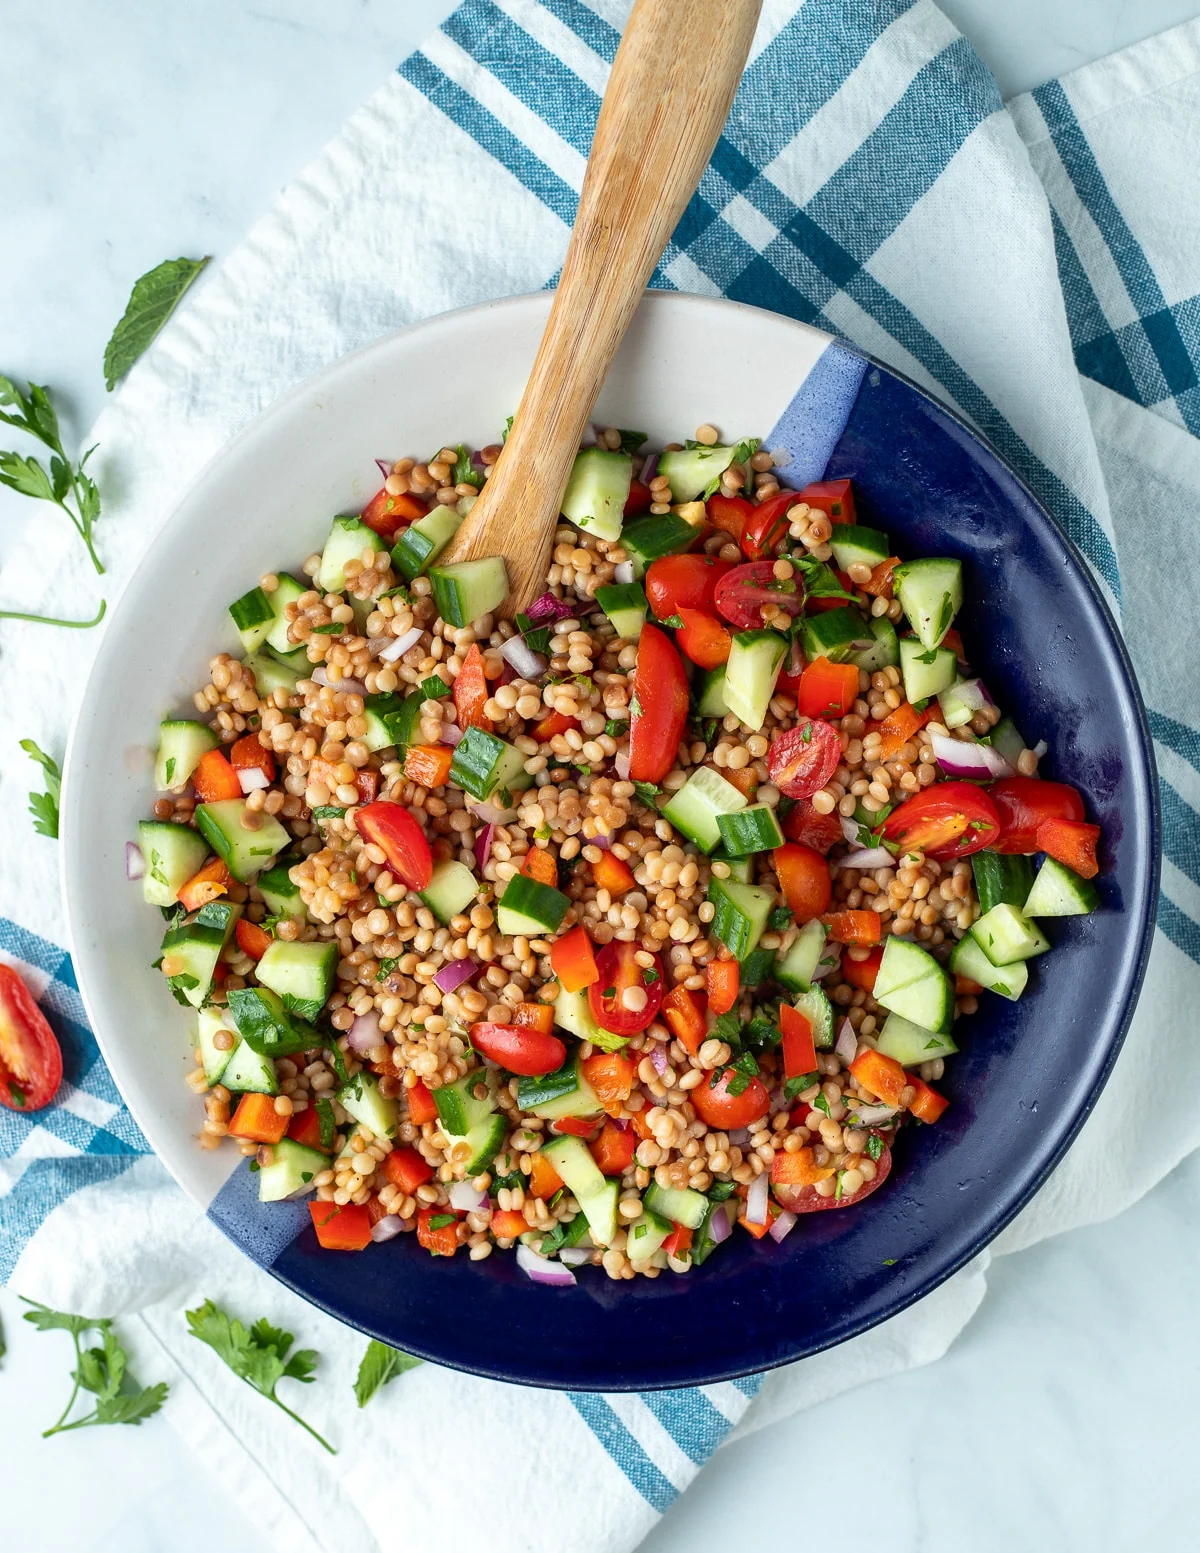 Healthy and Light BBQ Side Dishes - Pearled Couscous Salad